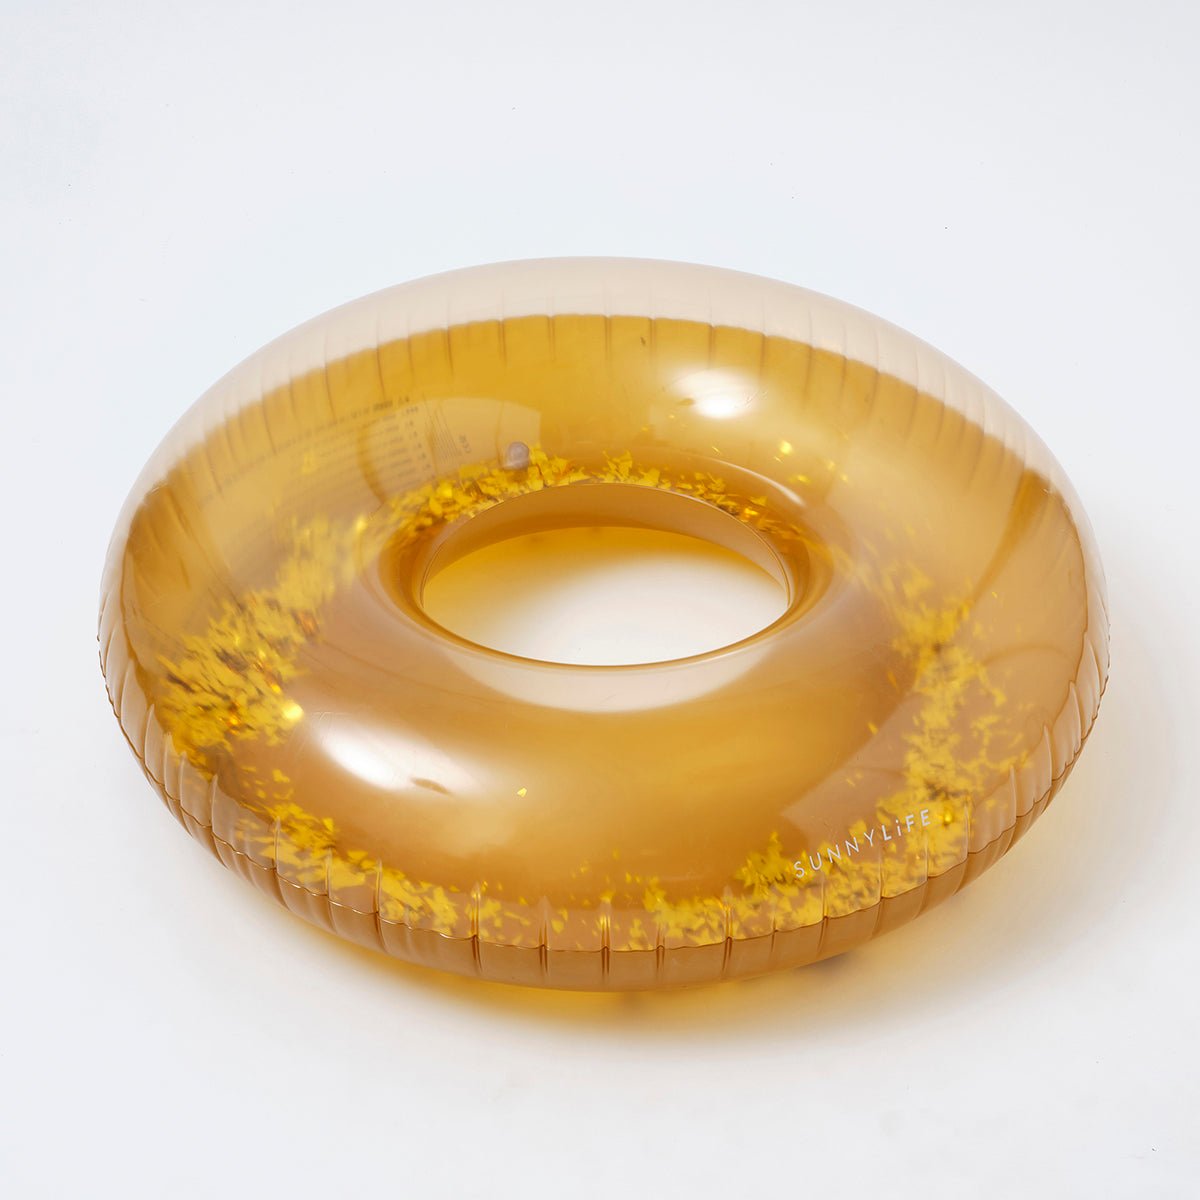 SUNNYLiFE Gold Color Inflatable Pool Ring Disco Gold - S3LPOLGO